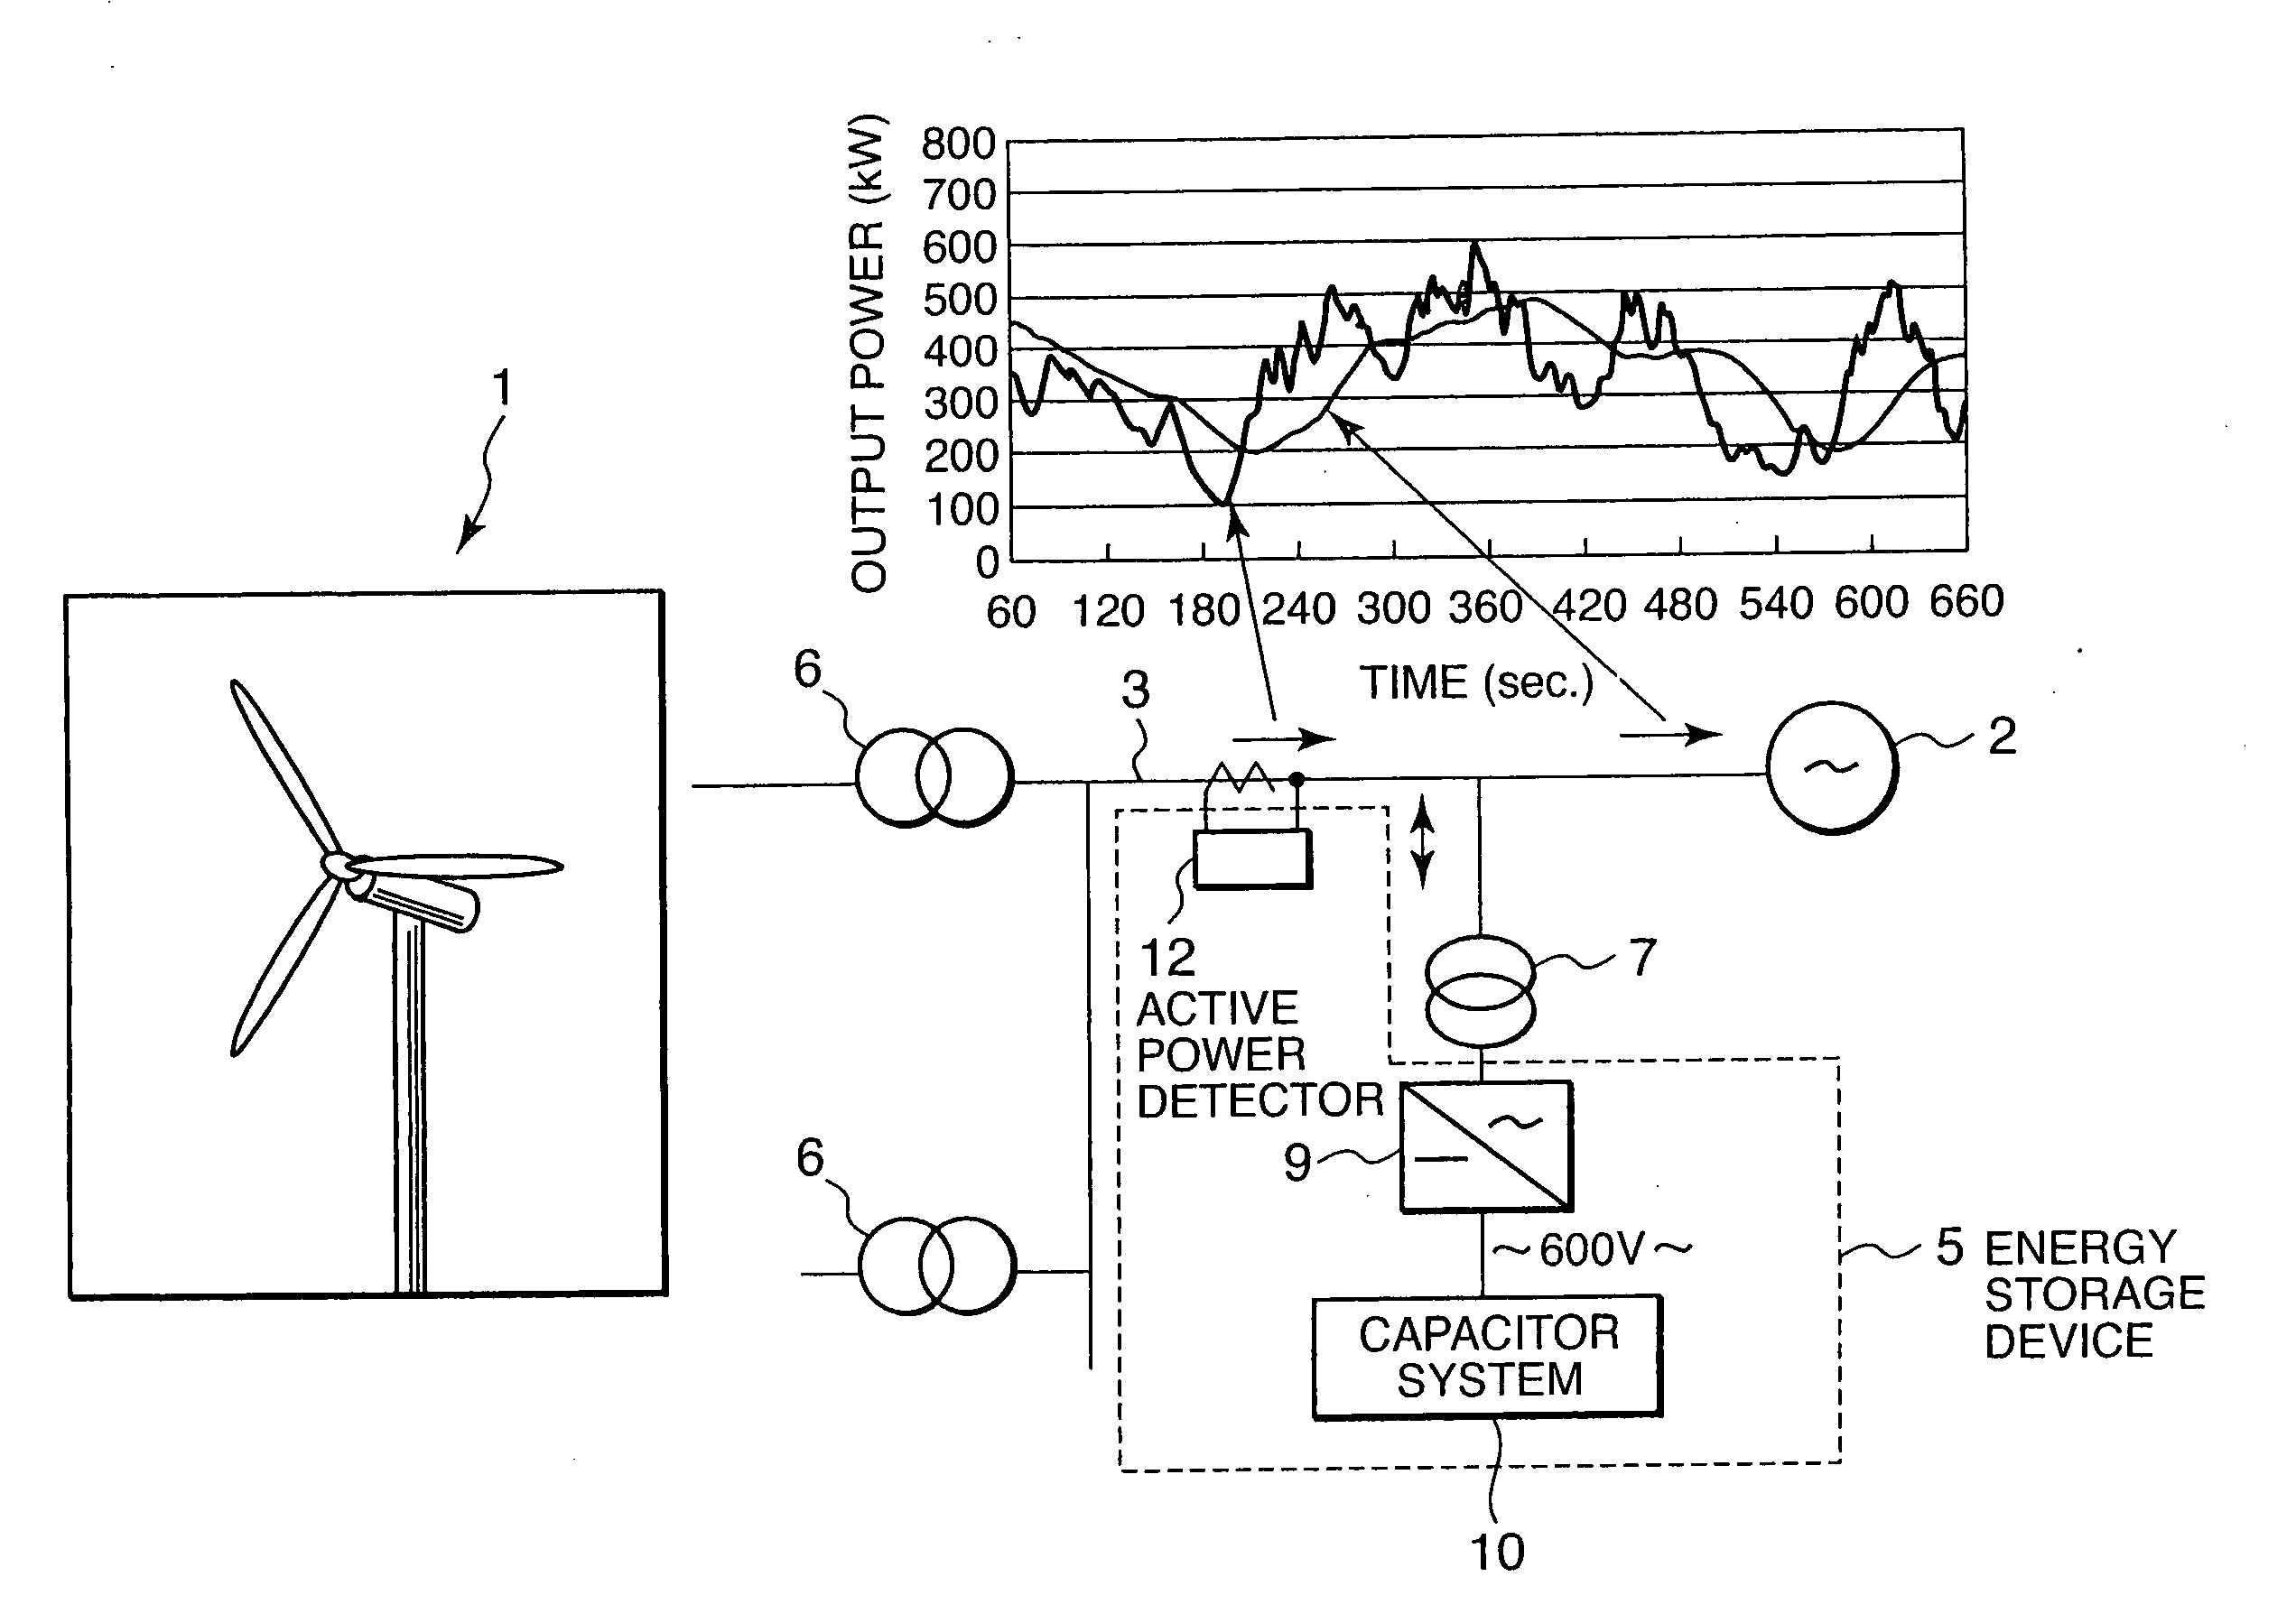 Charged/Discharged Power control for a Capacitor Type Energy Storage Device